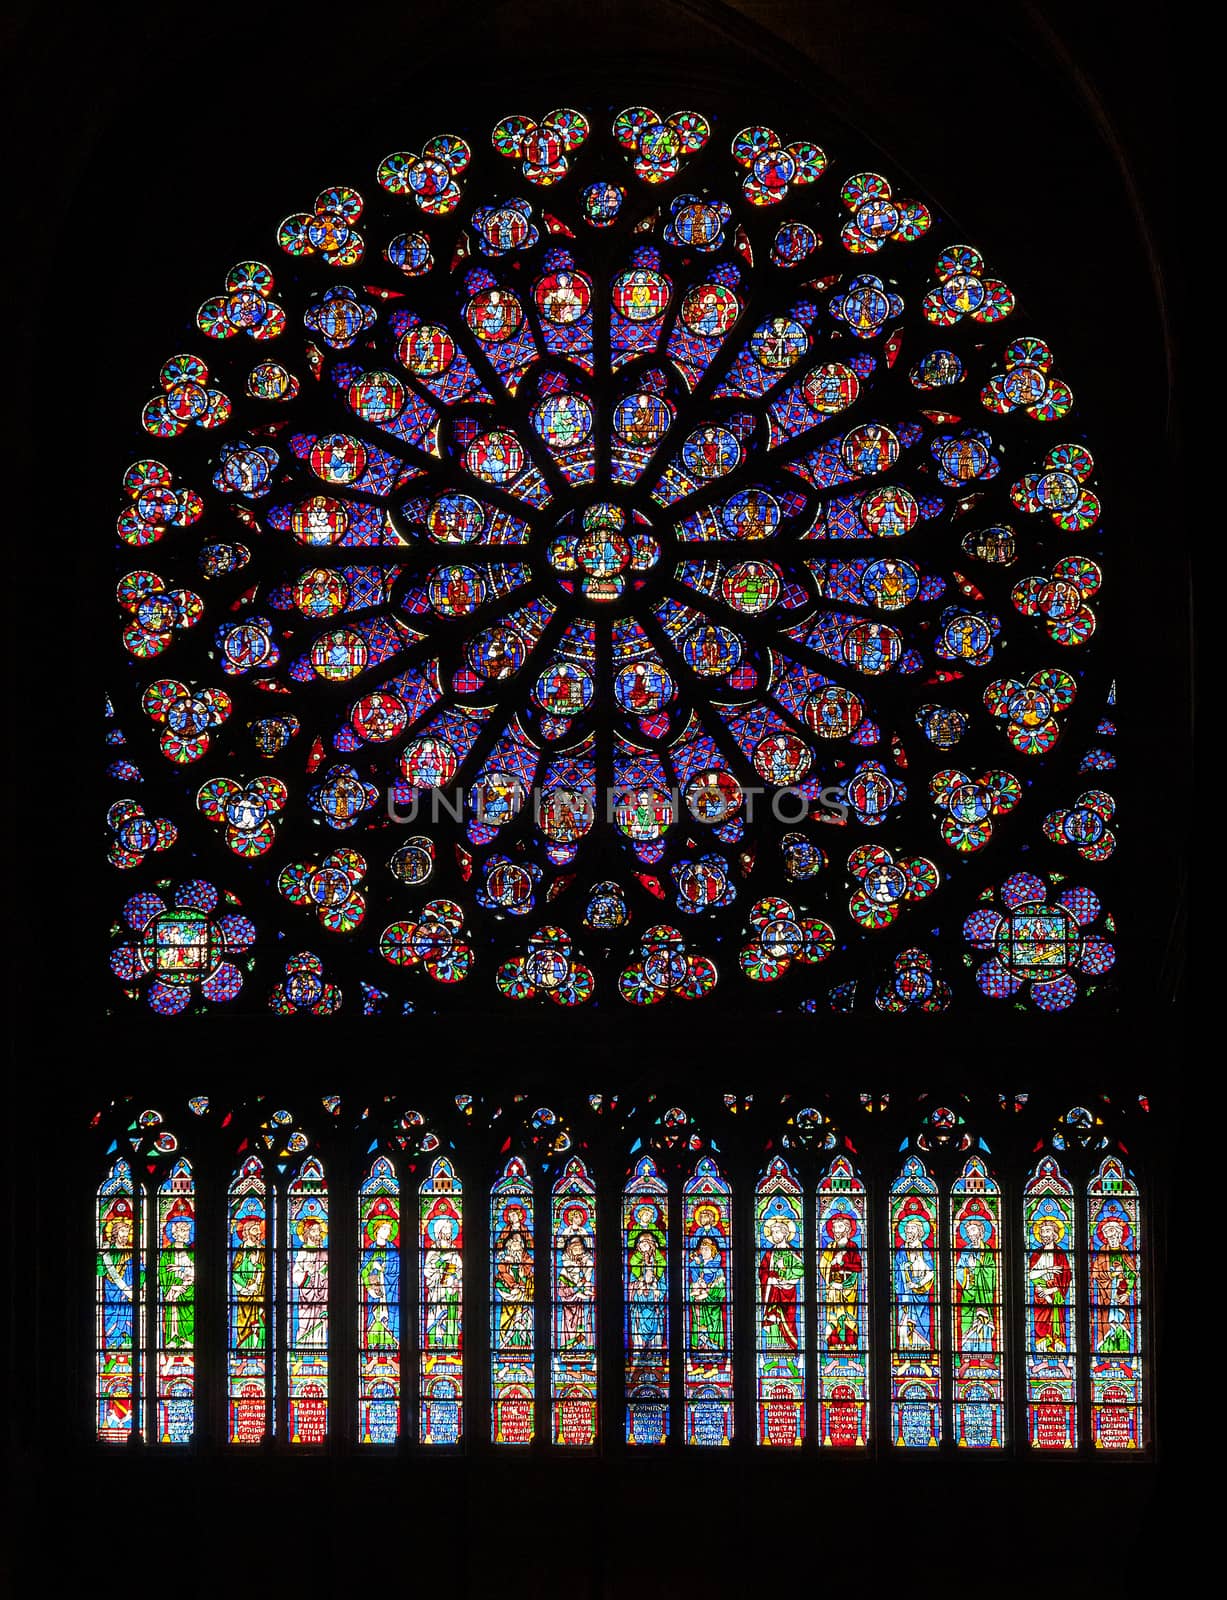 PARIS - OCTOBER 25, 2016: South rose window of Notre Dame cathedral by Goodday